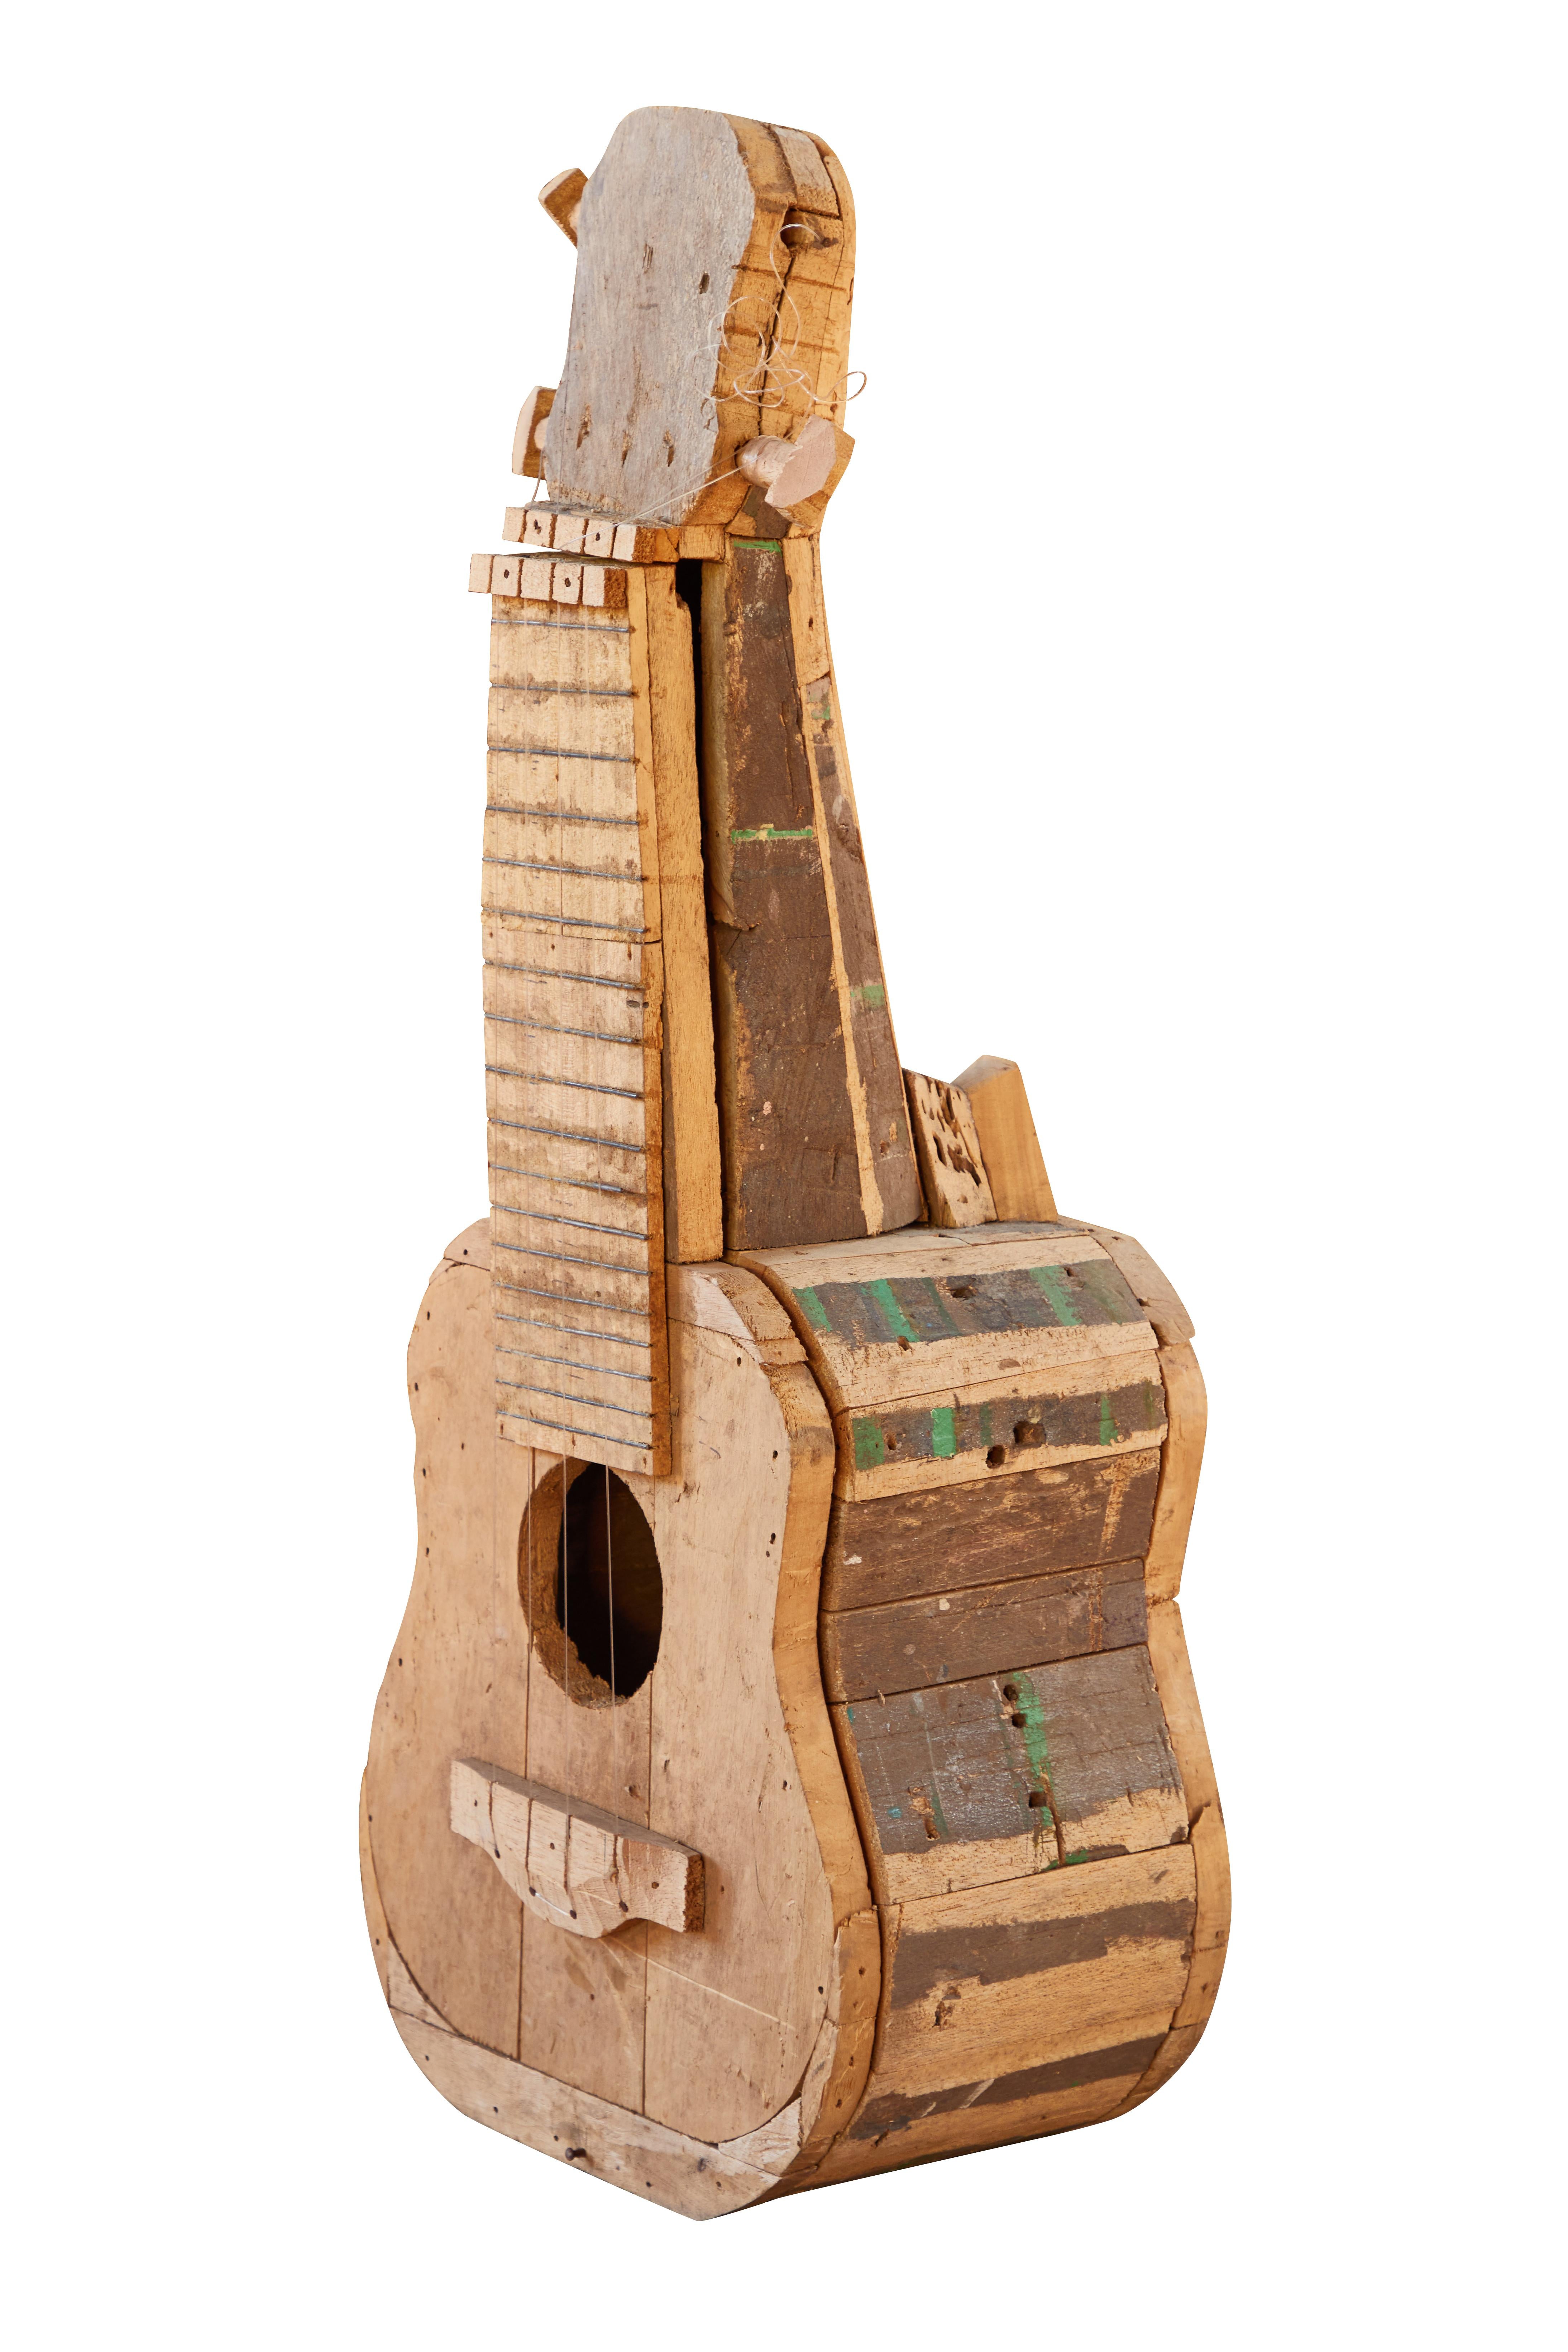 Large reclaimed wood guitar sculpture by African Folk Artist Nii Adum. Handcrafted from recycled woods in Ghana. With the advent of colonization, African carvers began to work European subjects into their repertoires, as well as into their musical